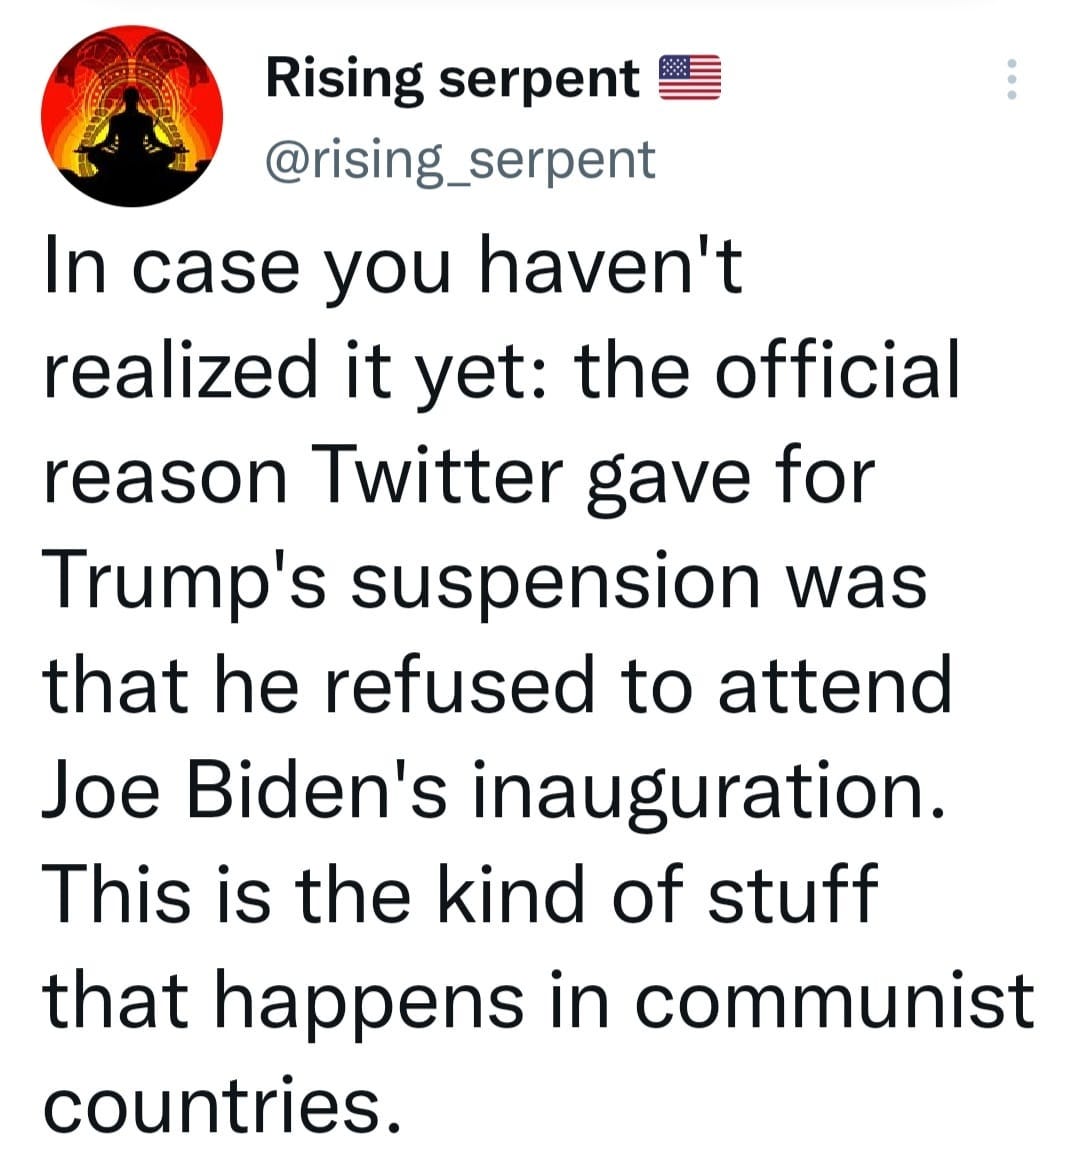 May be an image of one or more people and text that says 'Rising serpent @rising_serpent In case you haven't realized it yet: the official reason Twitter gave for Trump's suspension was that he refused to attend Joe Biden's inauguration. This is the kind of stuff that happens in communist countries.'